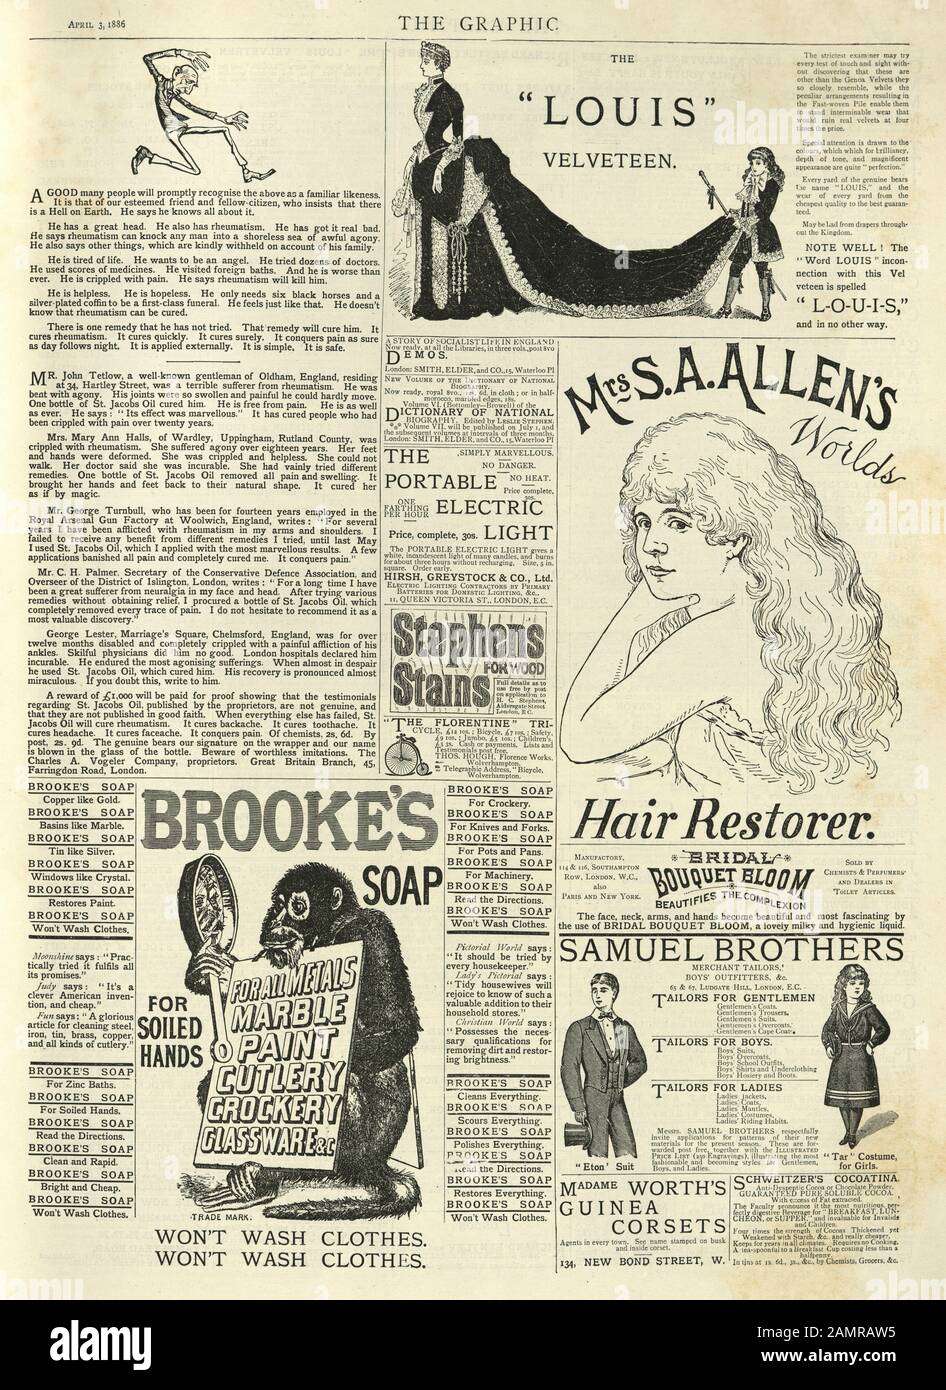 Page of Newspaper adverts from the Graphic Newspaper, Louis Velveteen, Mrs S A Allen's Hair restorer, Brooke's soap, Samuel Brothers Stock Photo